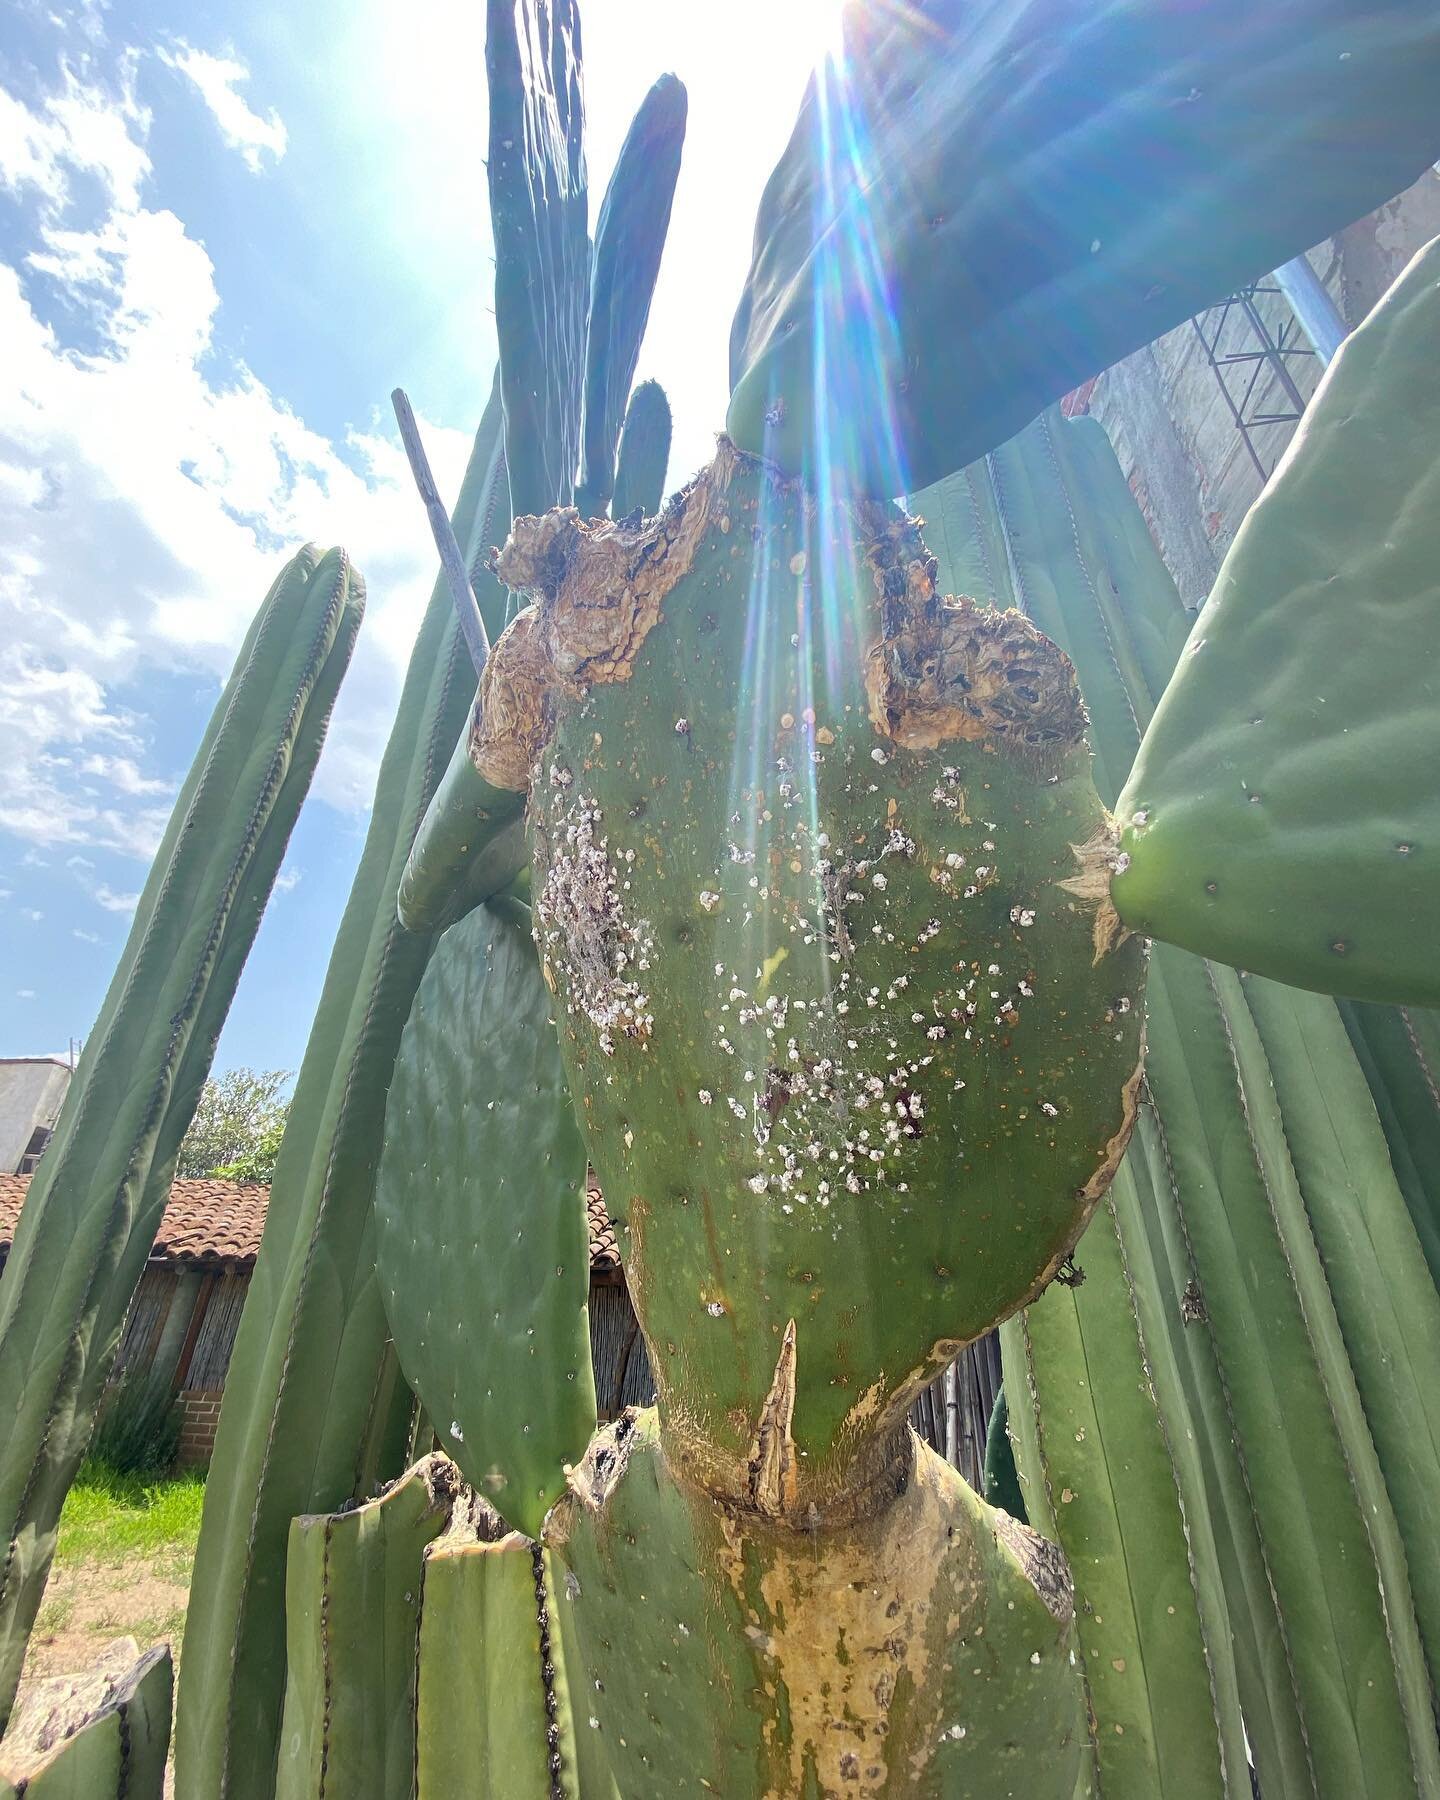 Fresh cochineal before it is removed from the cactus to create dye. #Cochineal is a traditional dye originally cultivated in Mexico, although the first known textiles that were found in the archaeological record are from Peru. 
This bright and beauti